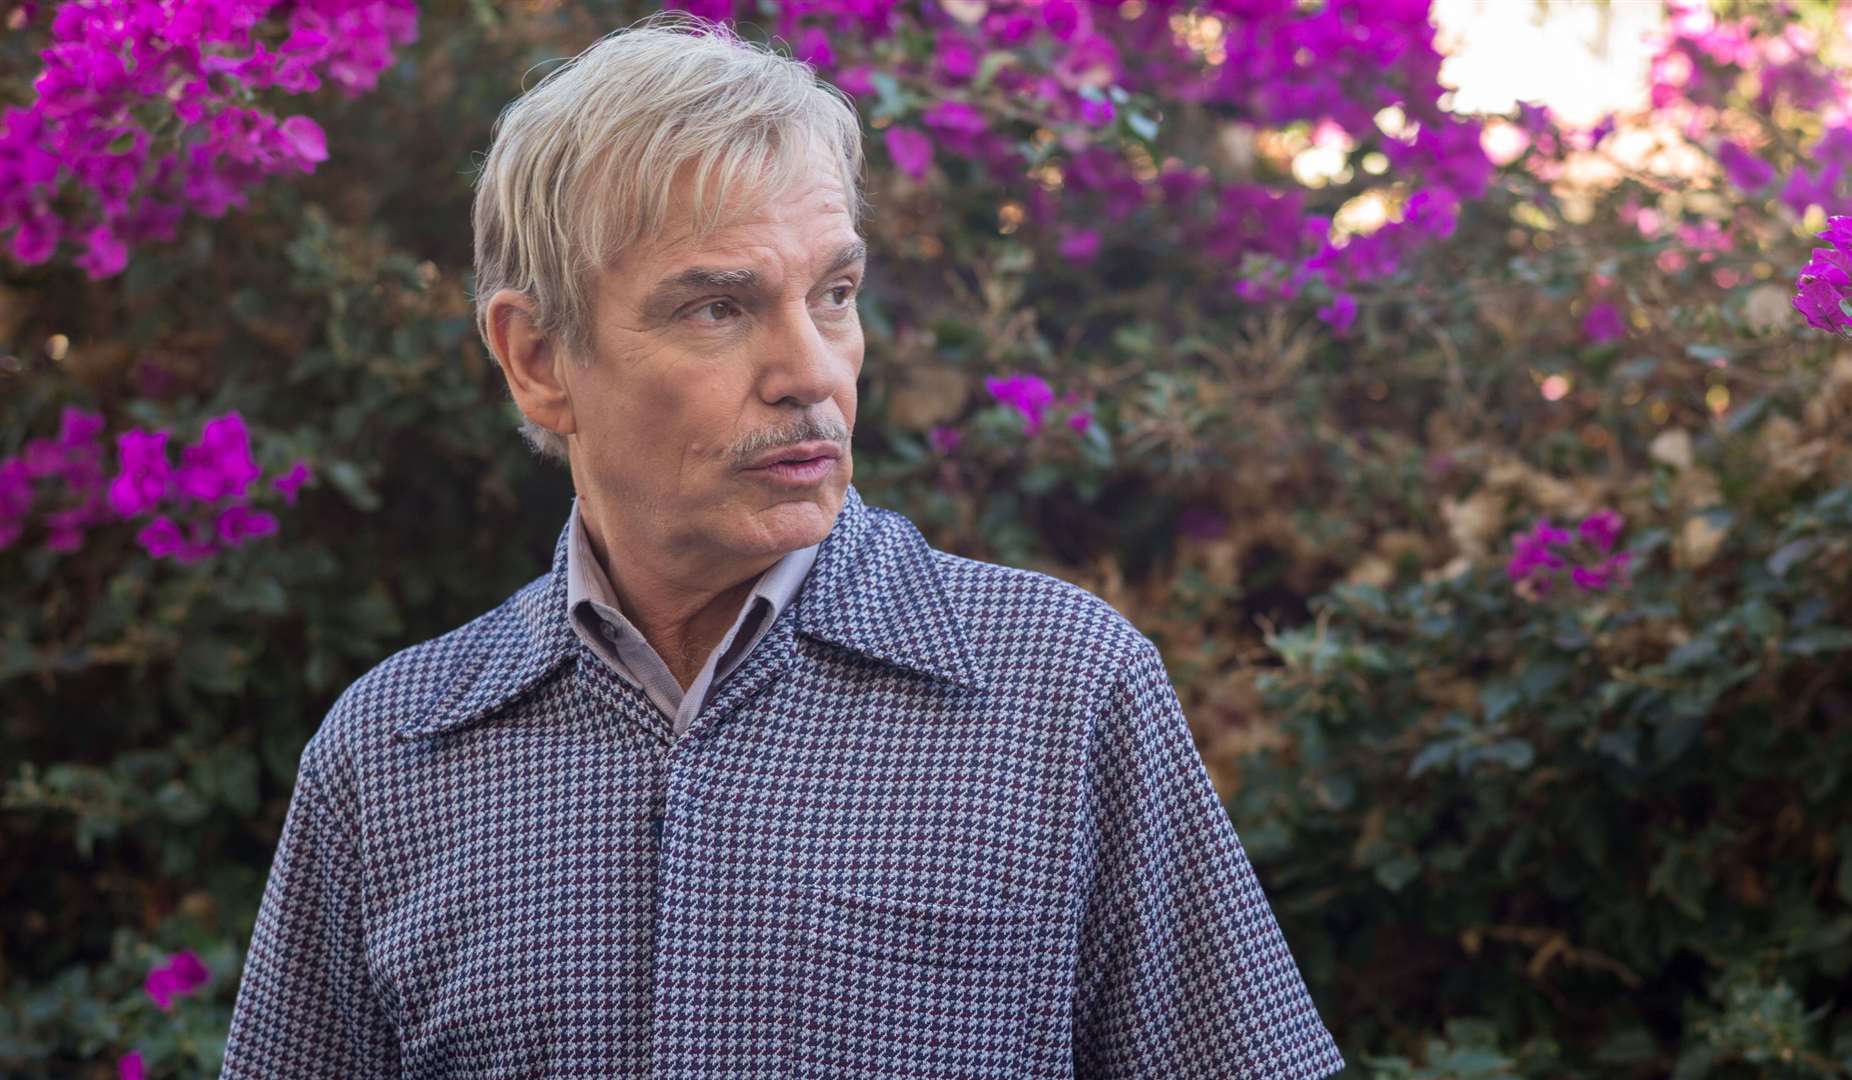 Billy Bob Thornton is bringing his band to the rock festival in Maidstone next year